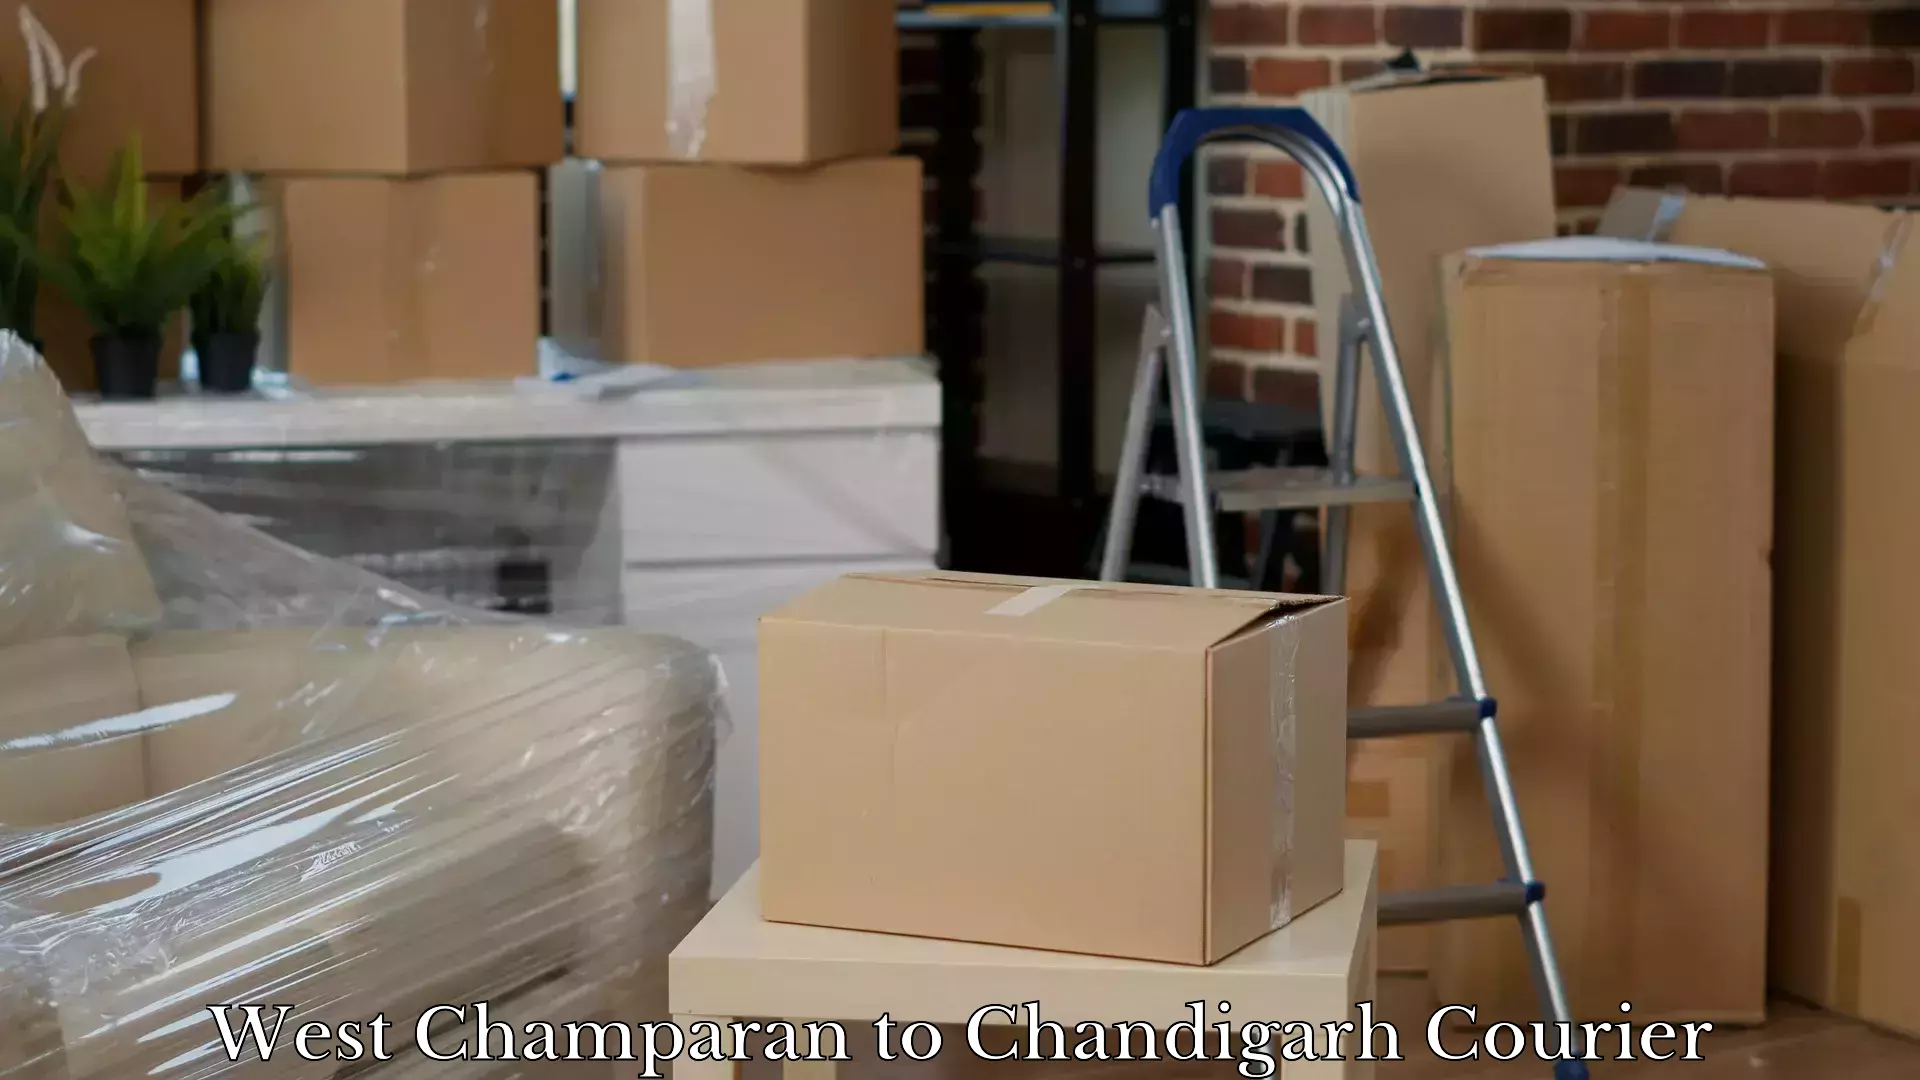 Online luggage shipping booking West Champaran to Chandigarh